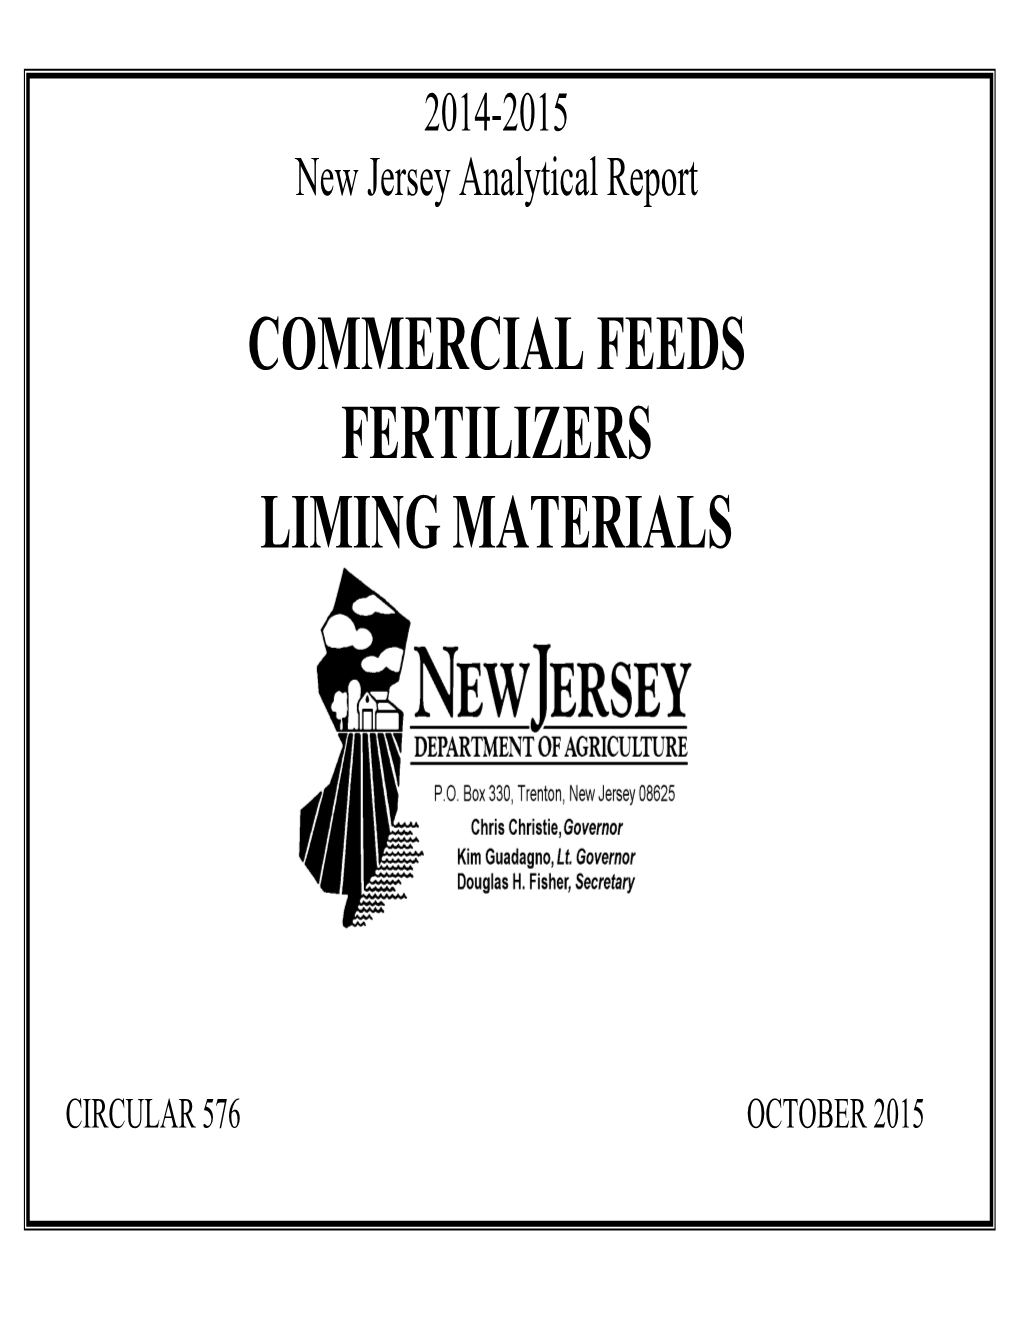 New Jersey Commercial Feeds, Fertilizers, Liming Materials Report